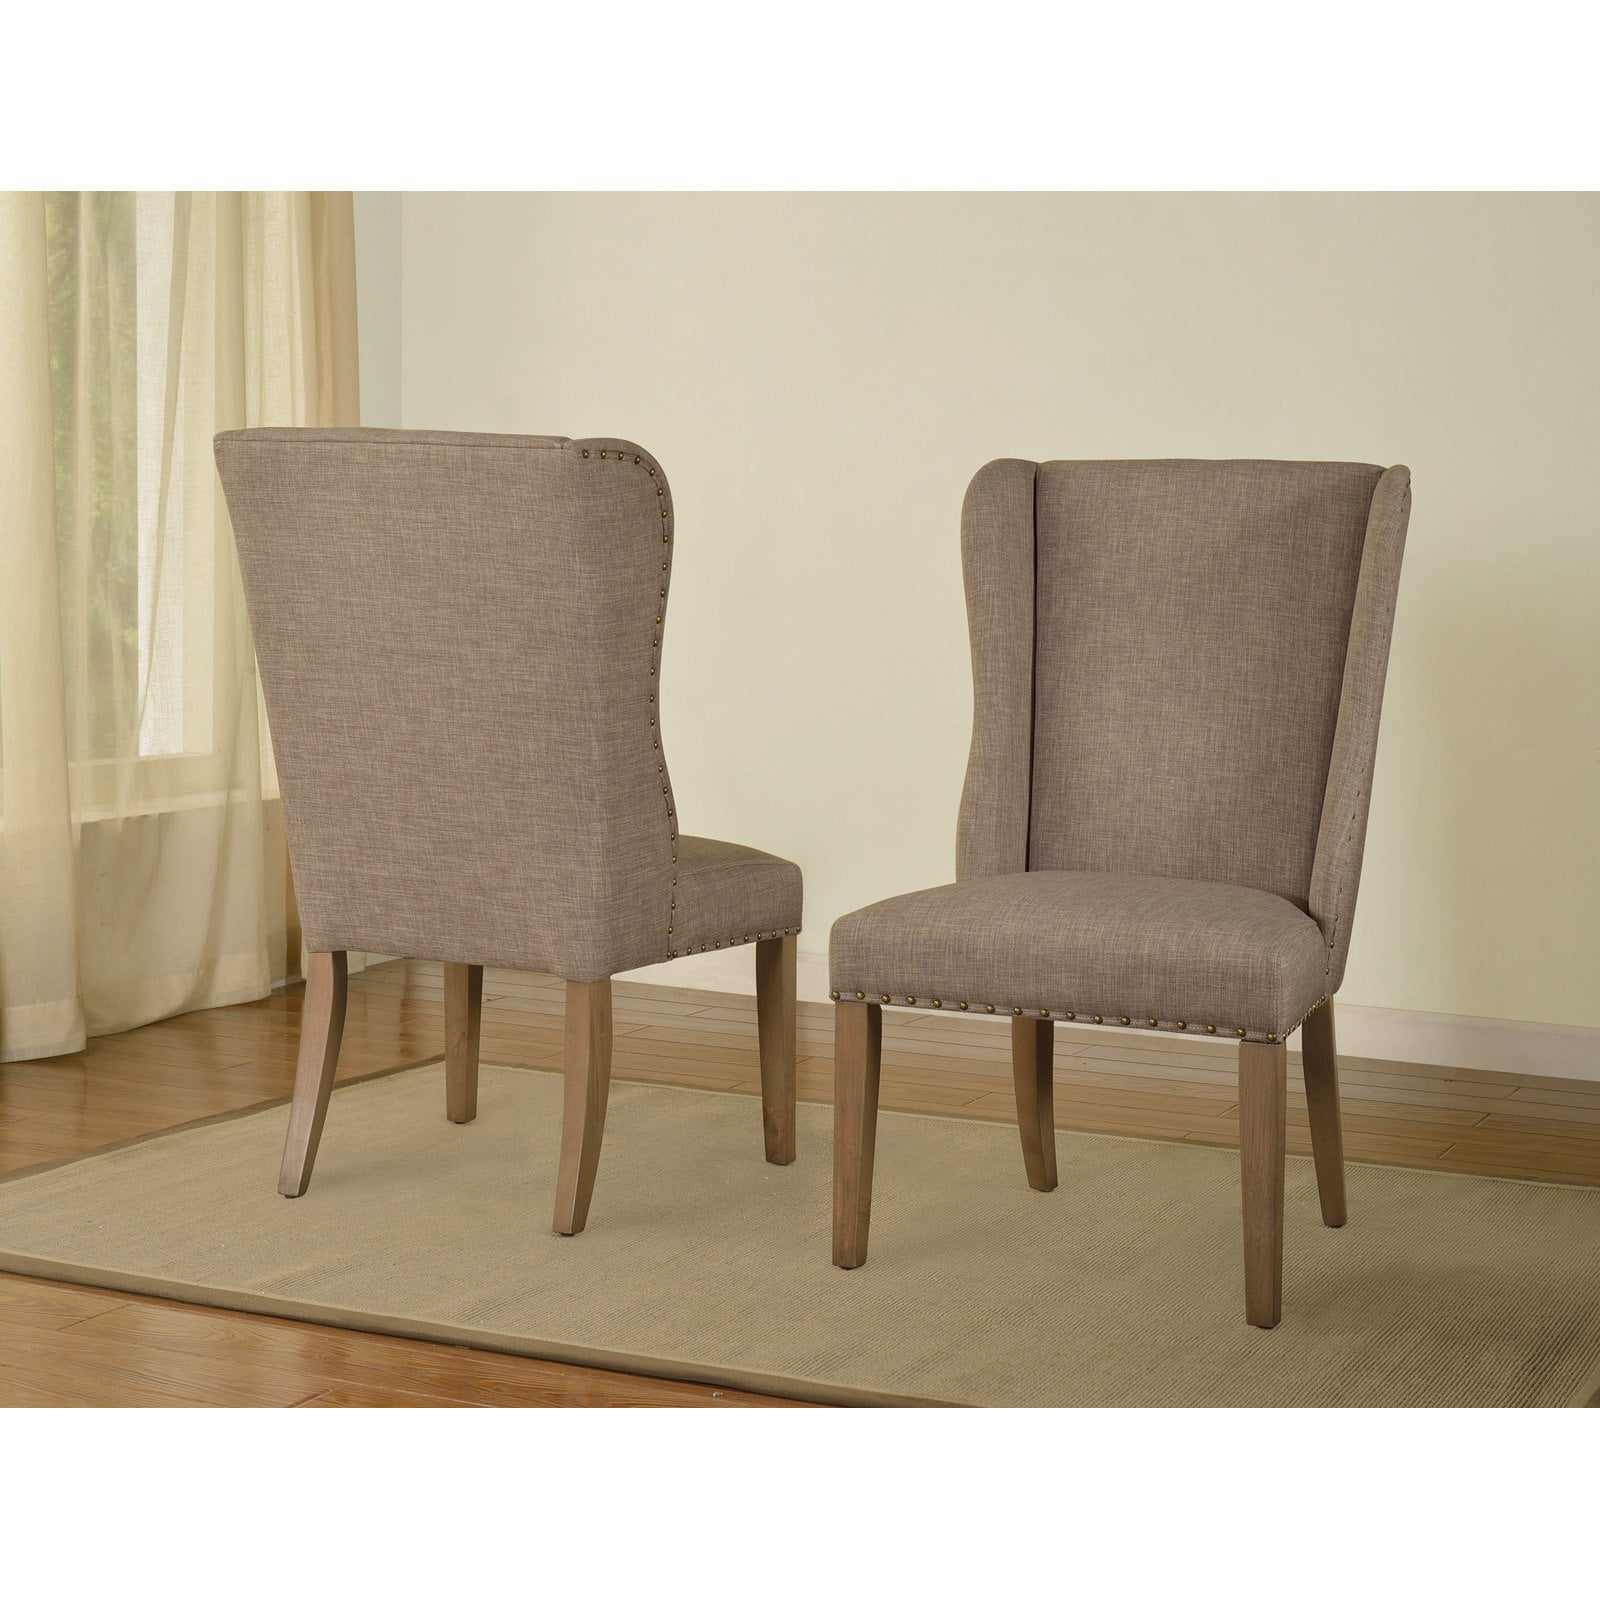 Modus Alex Upholstered Wingback Dining Chair Set Of 2